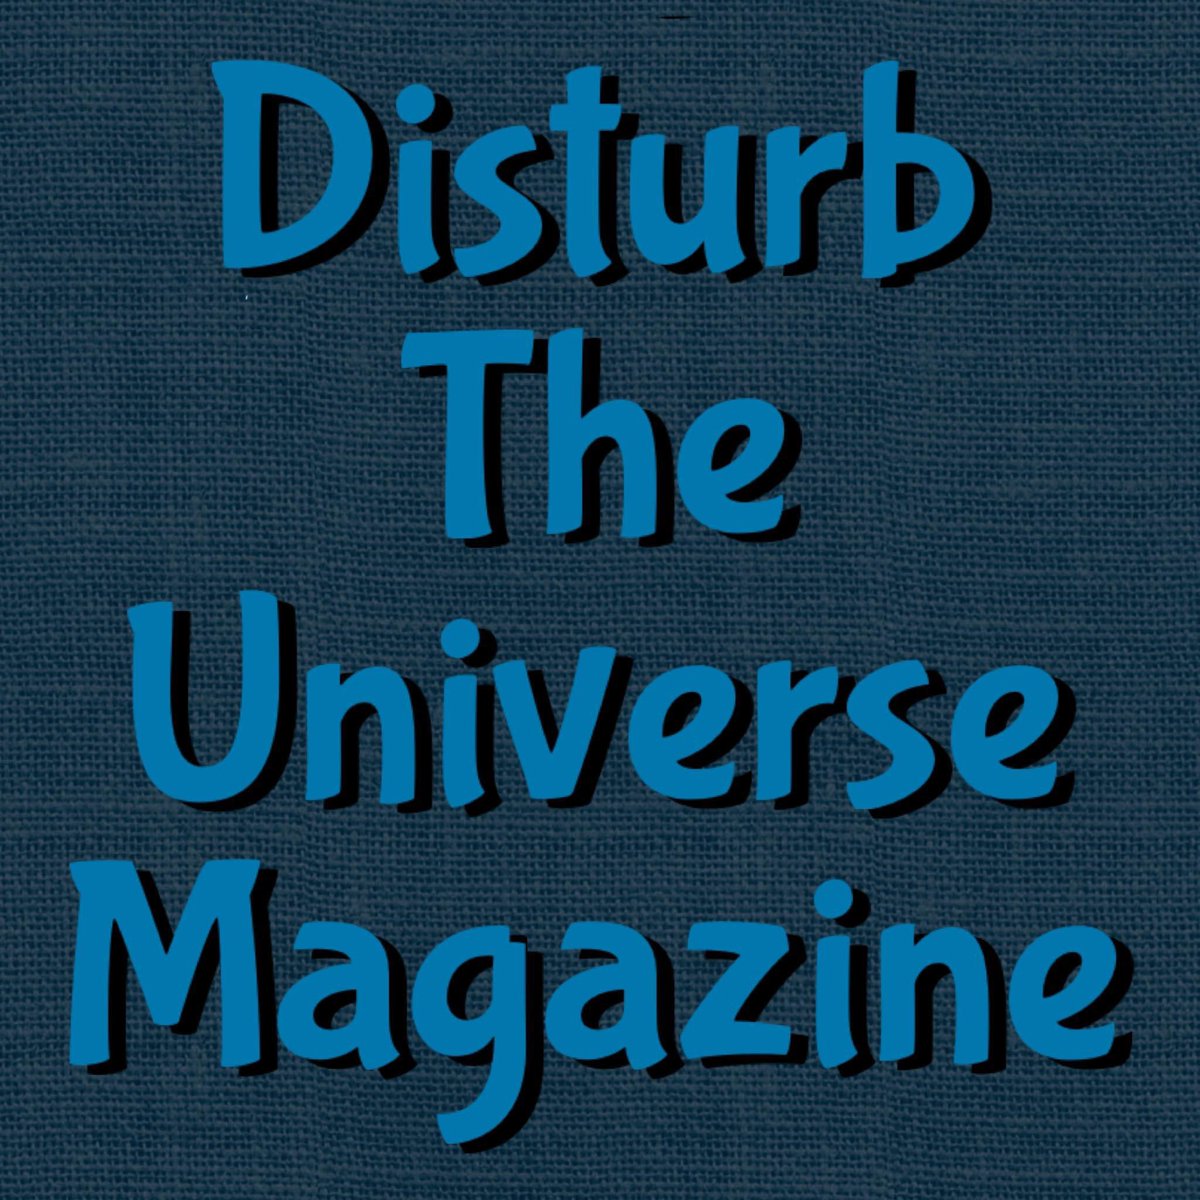 Up today at Disturb The Universe Magazine 

A Man Faces Up by John Grey

disturbtheuniversemagazine.com/2024/05/a-man-…

#publishedwriting #disturbtheuniversemagazine #published #writingcommunity #poetry #writing #publishedpoetry #poetrylovers #poetrytwitter #poetrycommunity